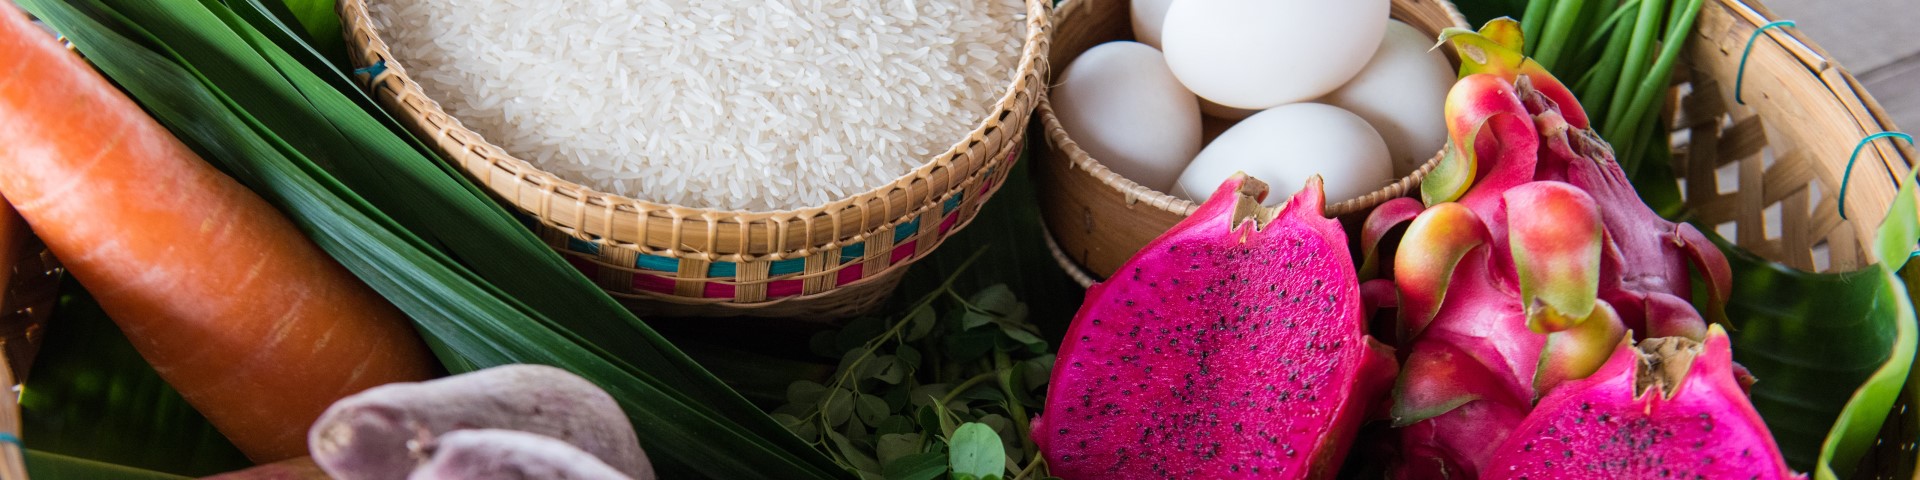 The picture shows a basket with food like rice, eggs and dragon fruit.